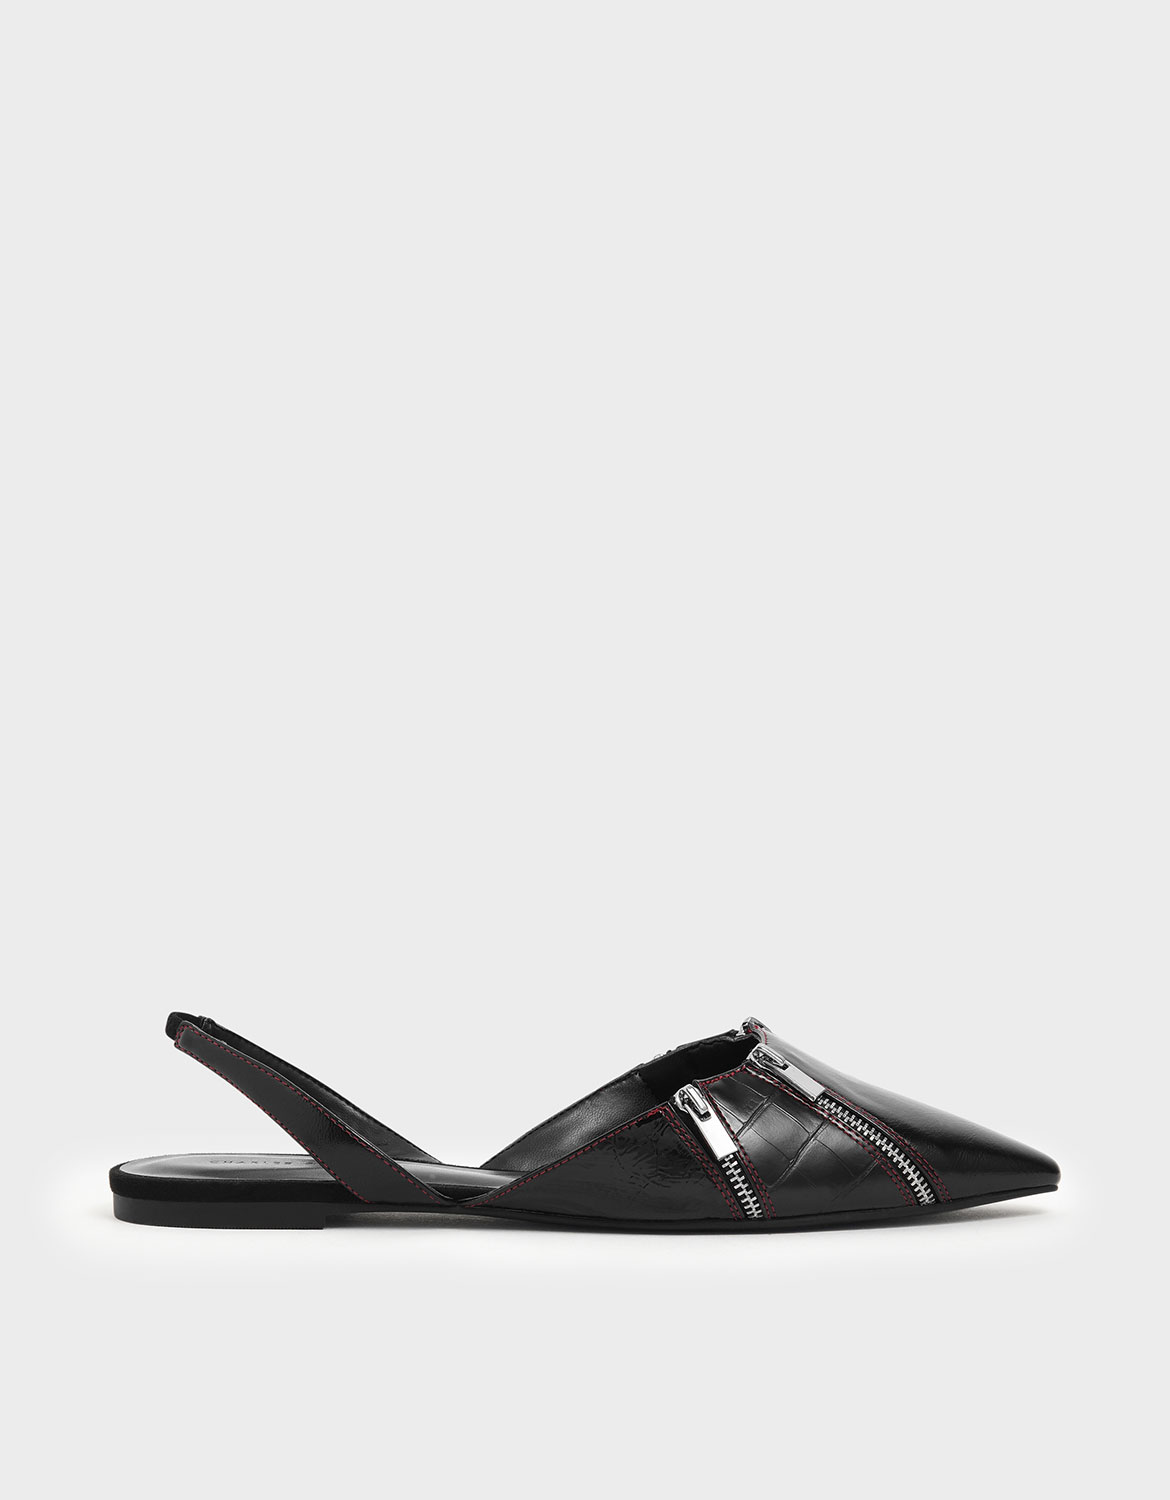 Wrinkled Patent Zip Detail Pointed Toe Slingback Flats